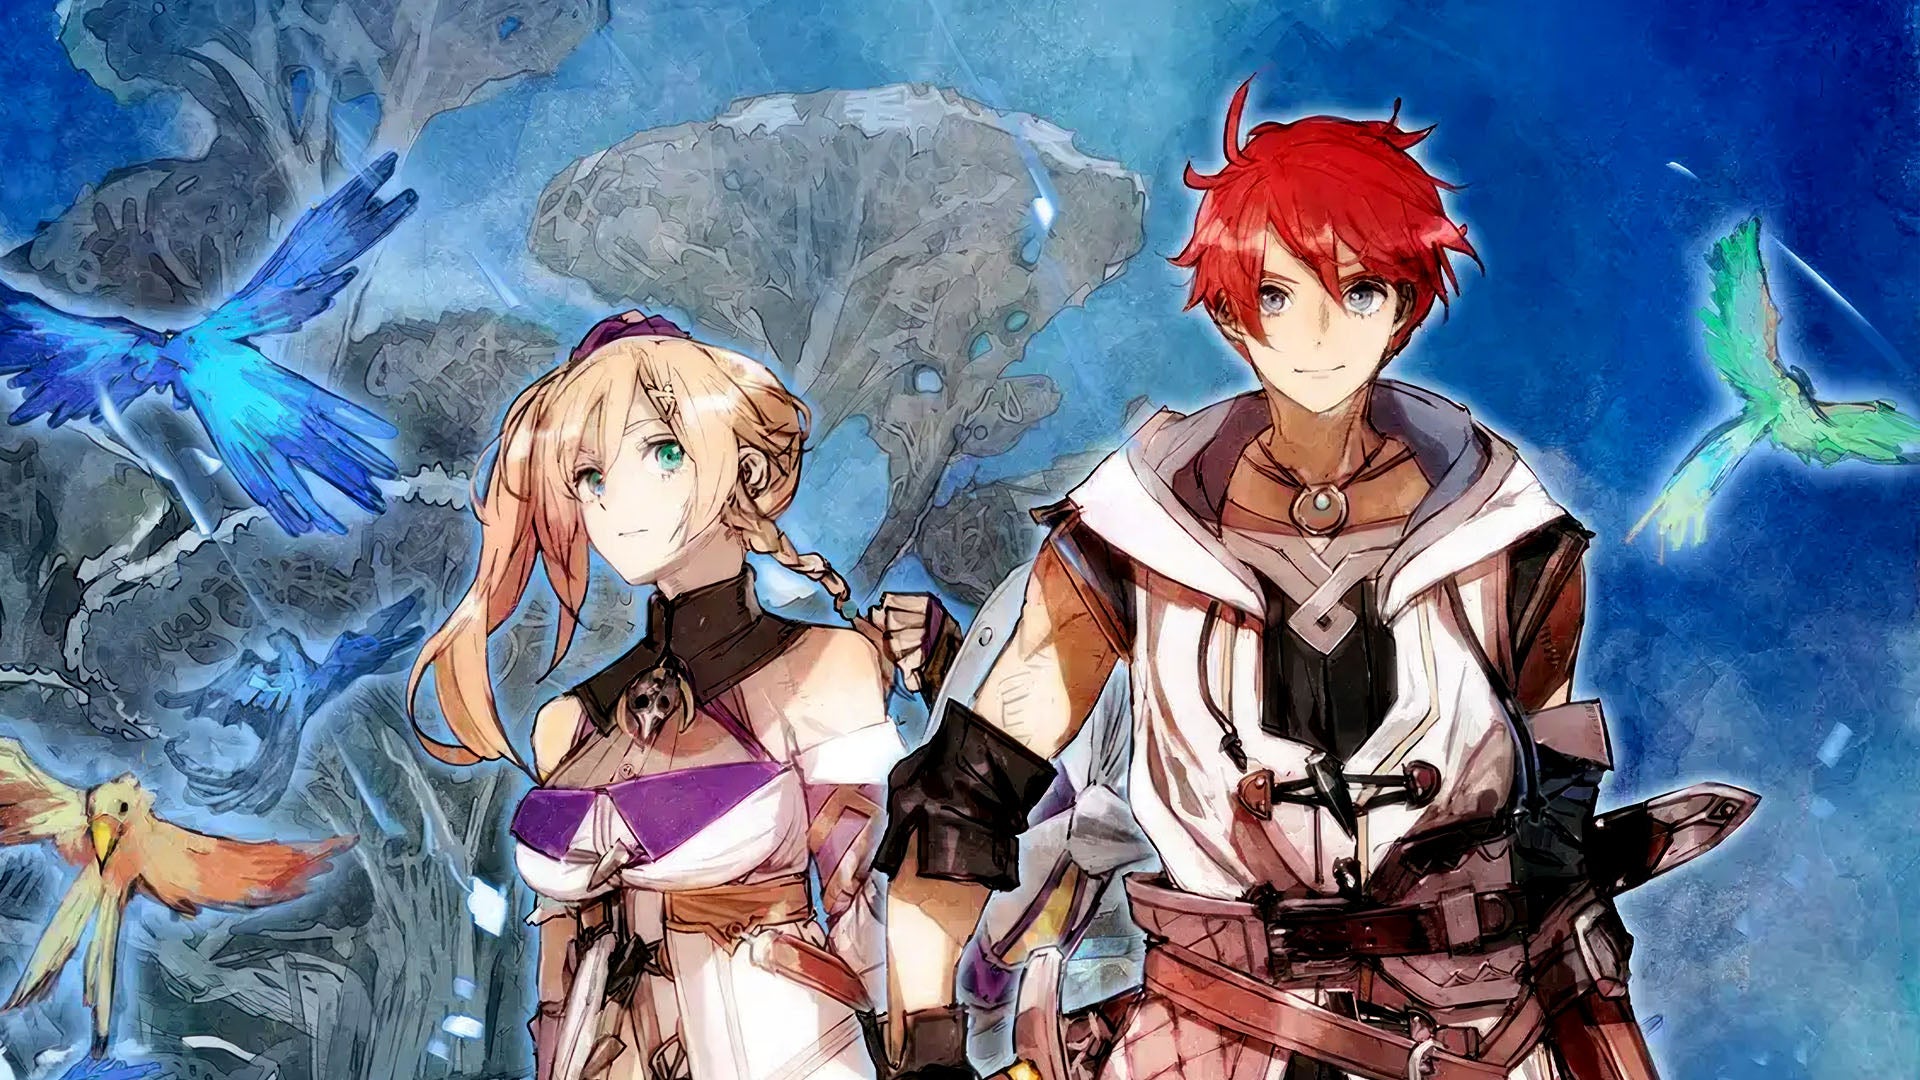 Ys X: Nordics is an action RPG to look forward to | Eurogamer.net